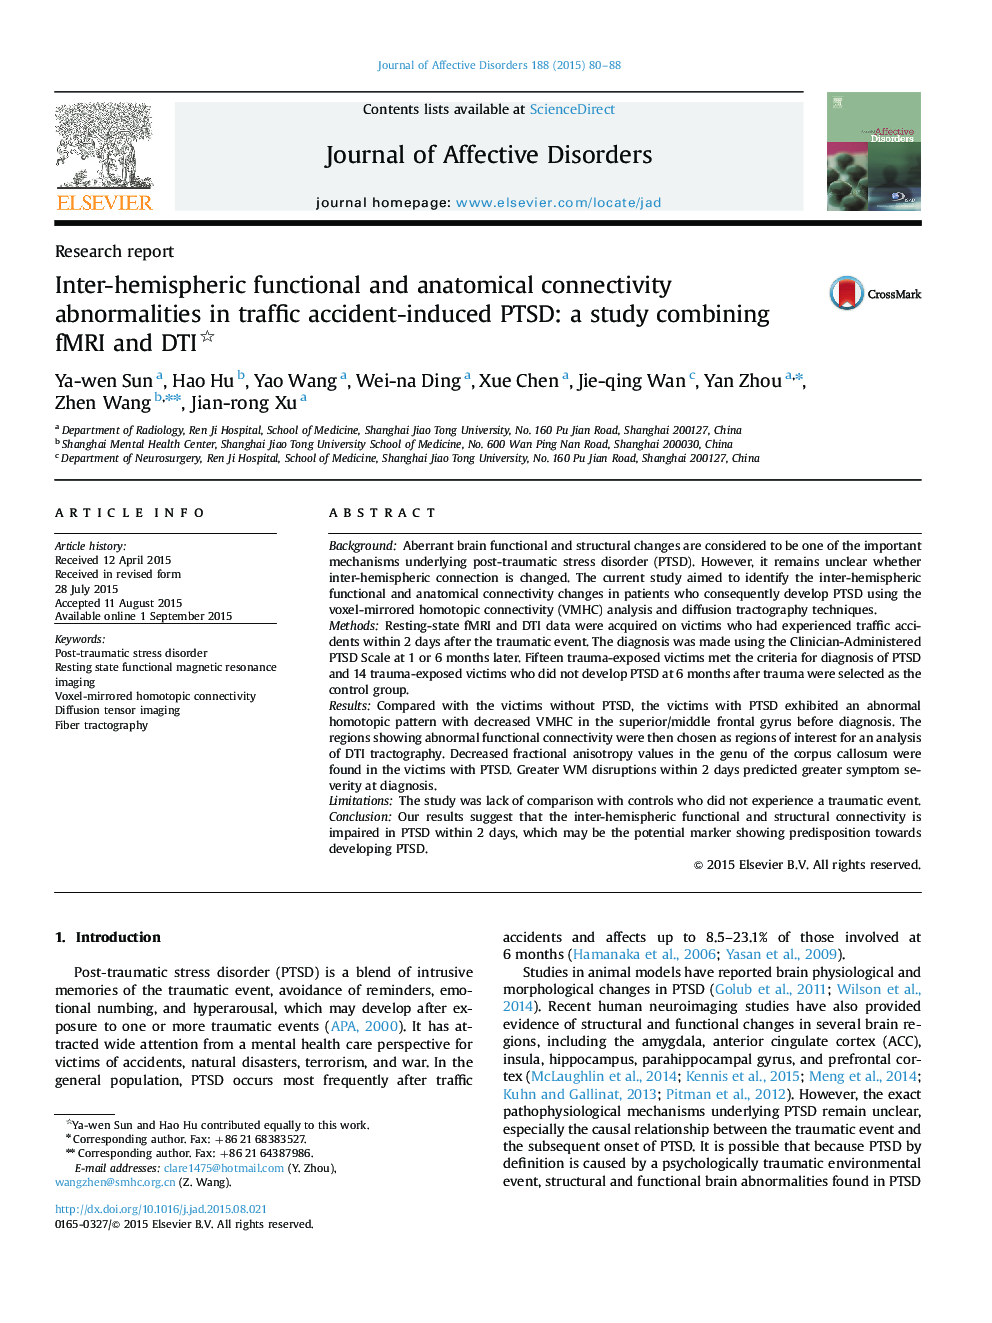 Inter-hemispheric functional and anatomical connectivity abnormalities in traffic accident-induced PTSD: a study combining fMRI and DTI